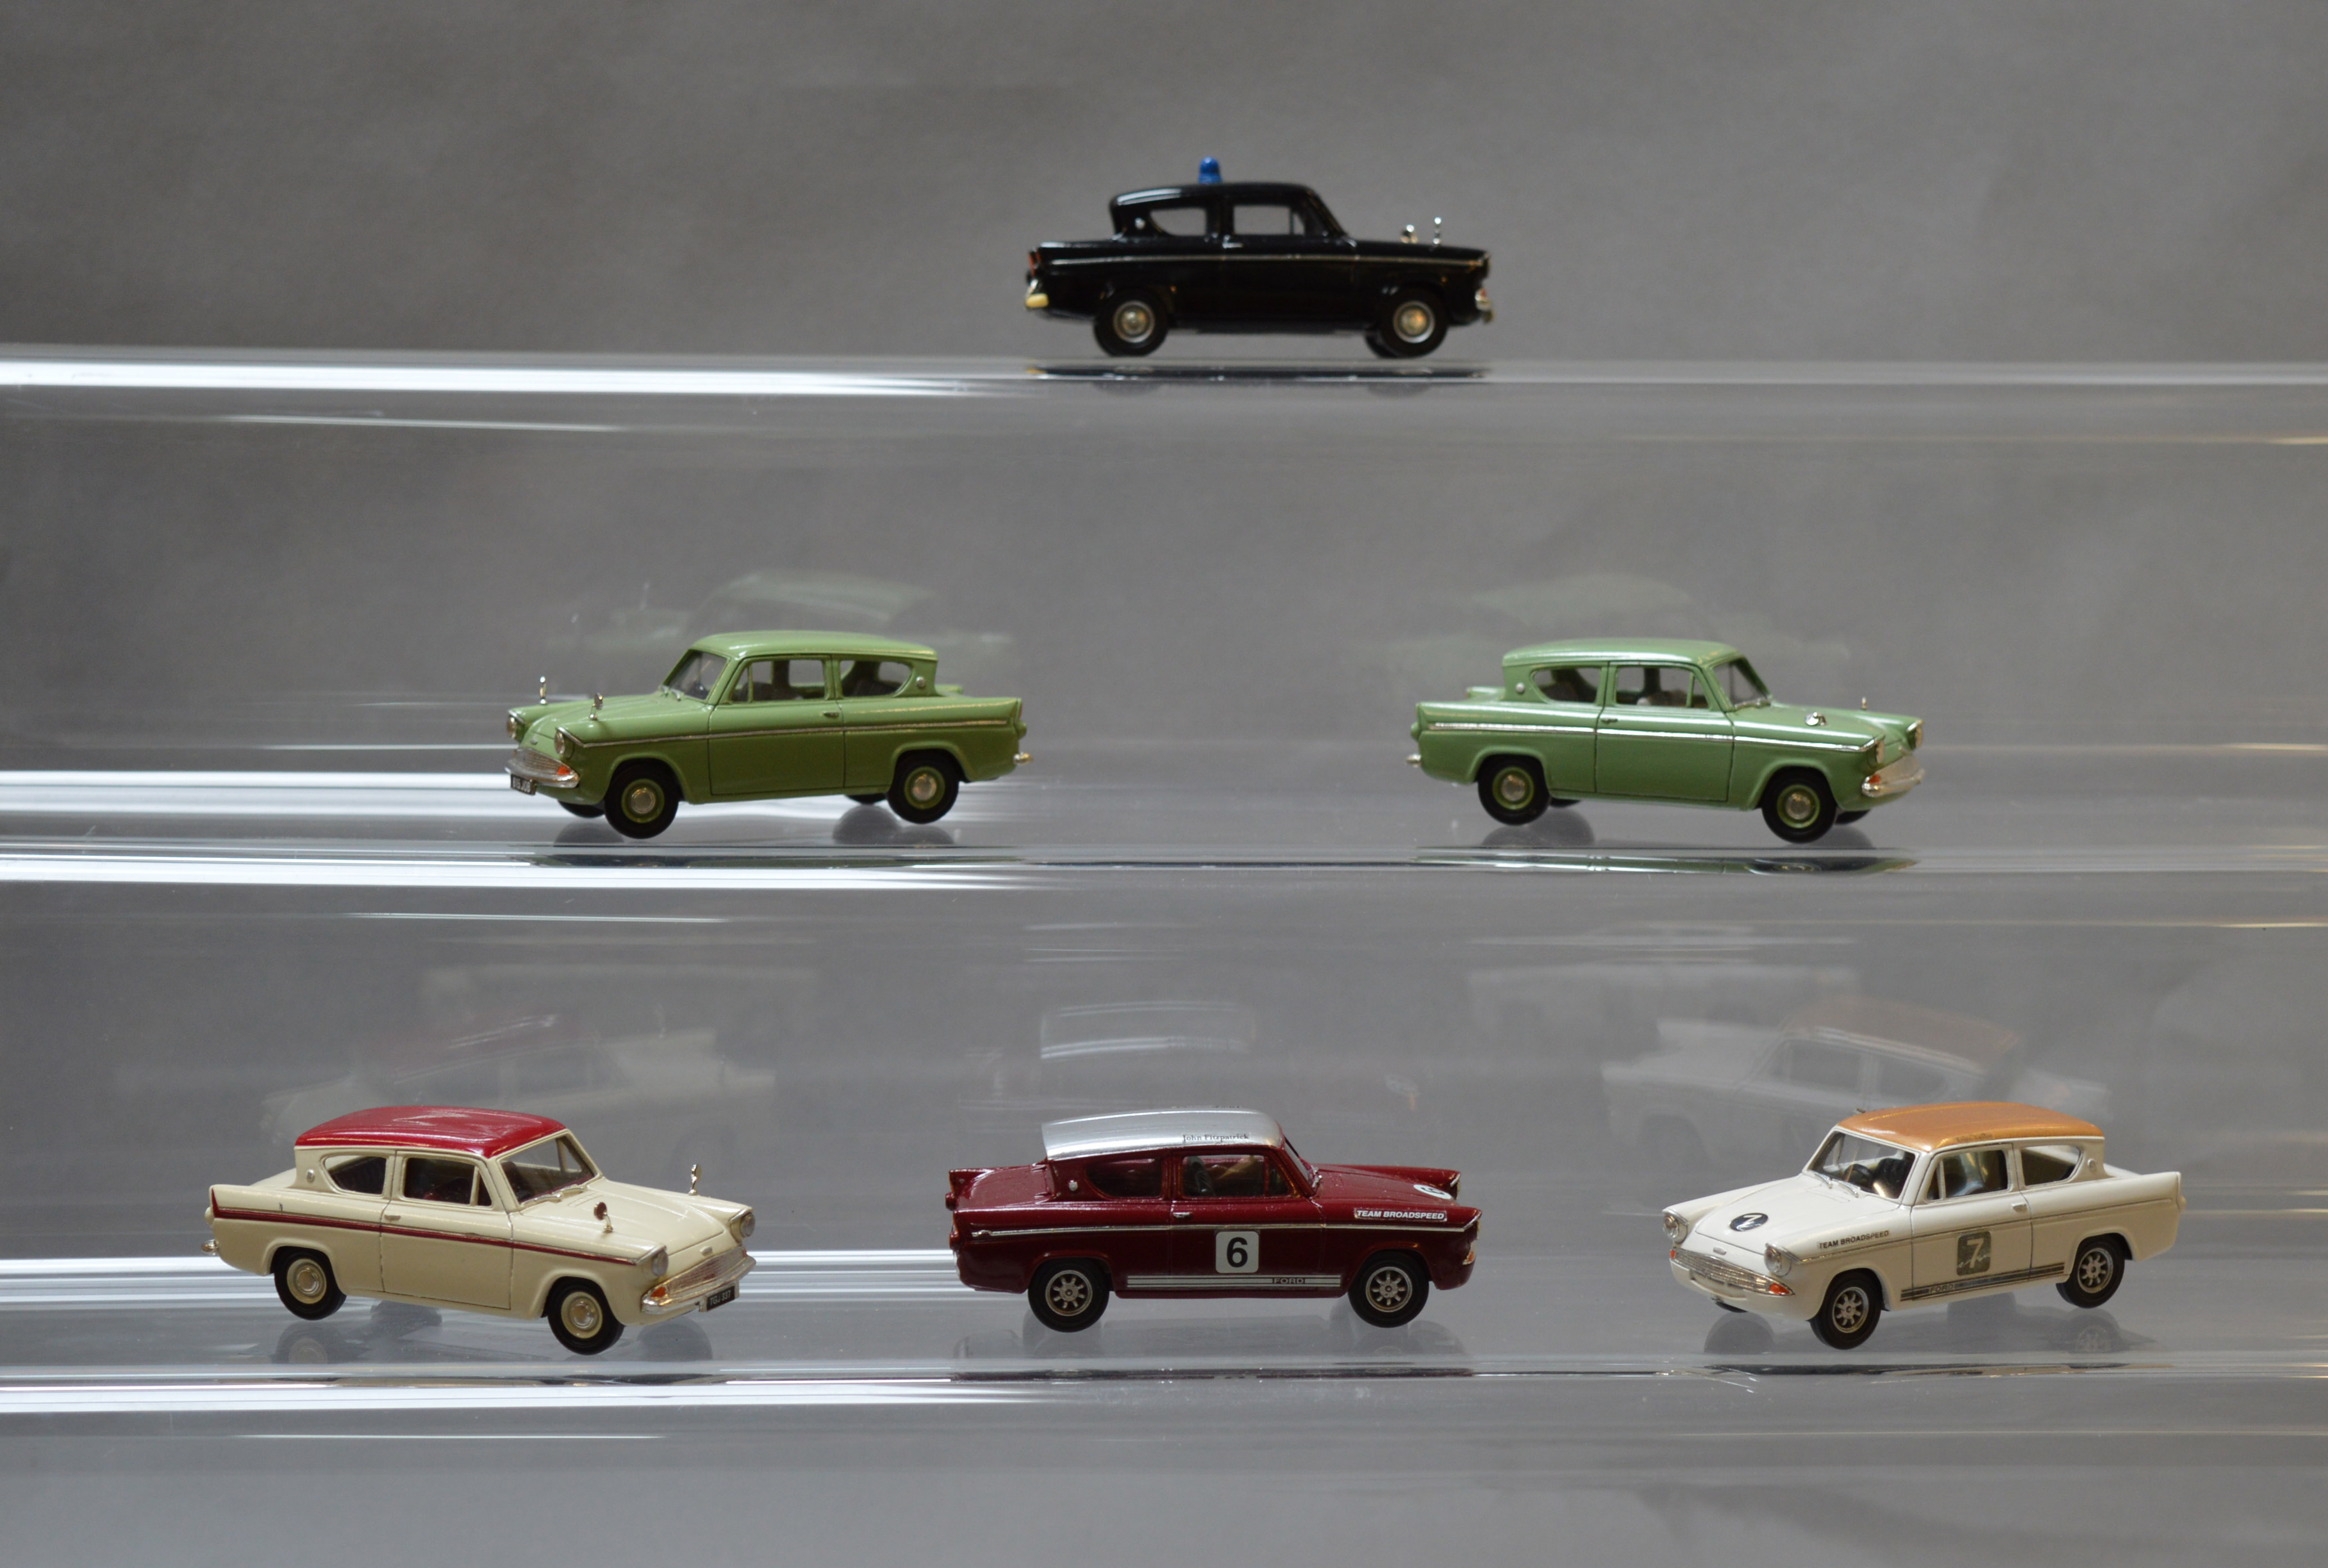 Six unboxed Lledo pre-production prototype Vanguards Ford Anglia resin car models,